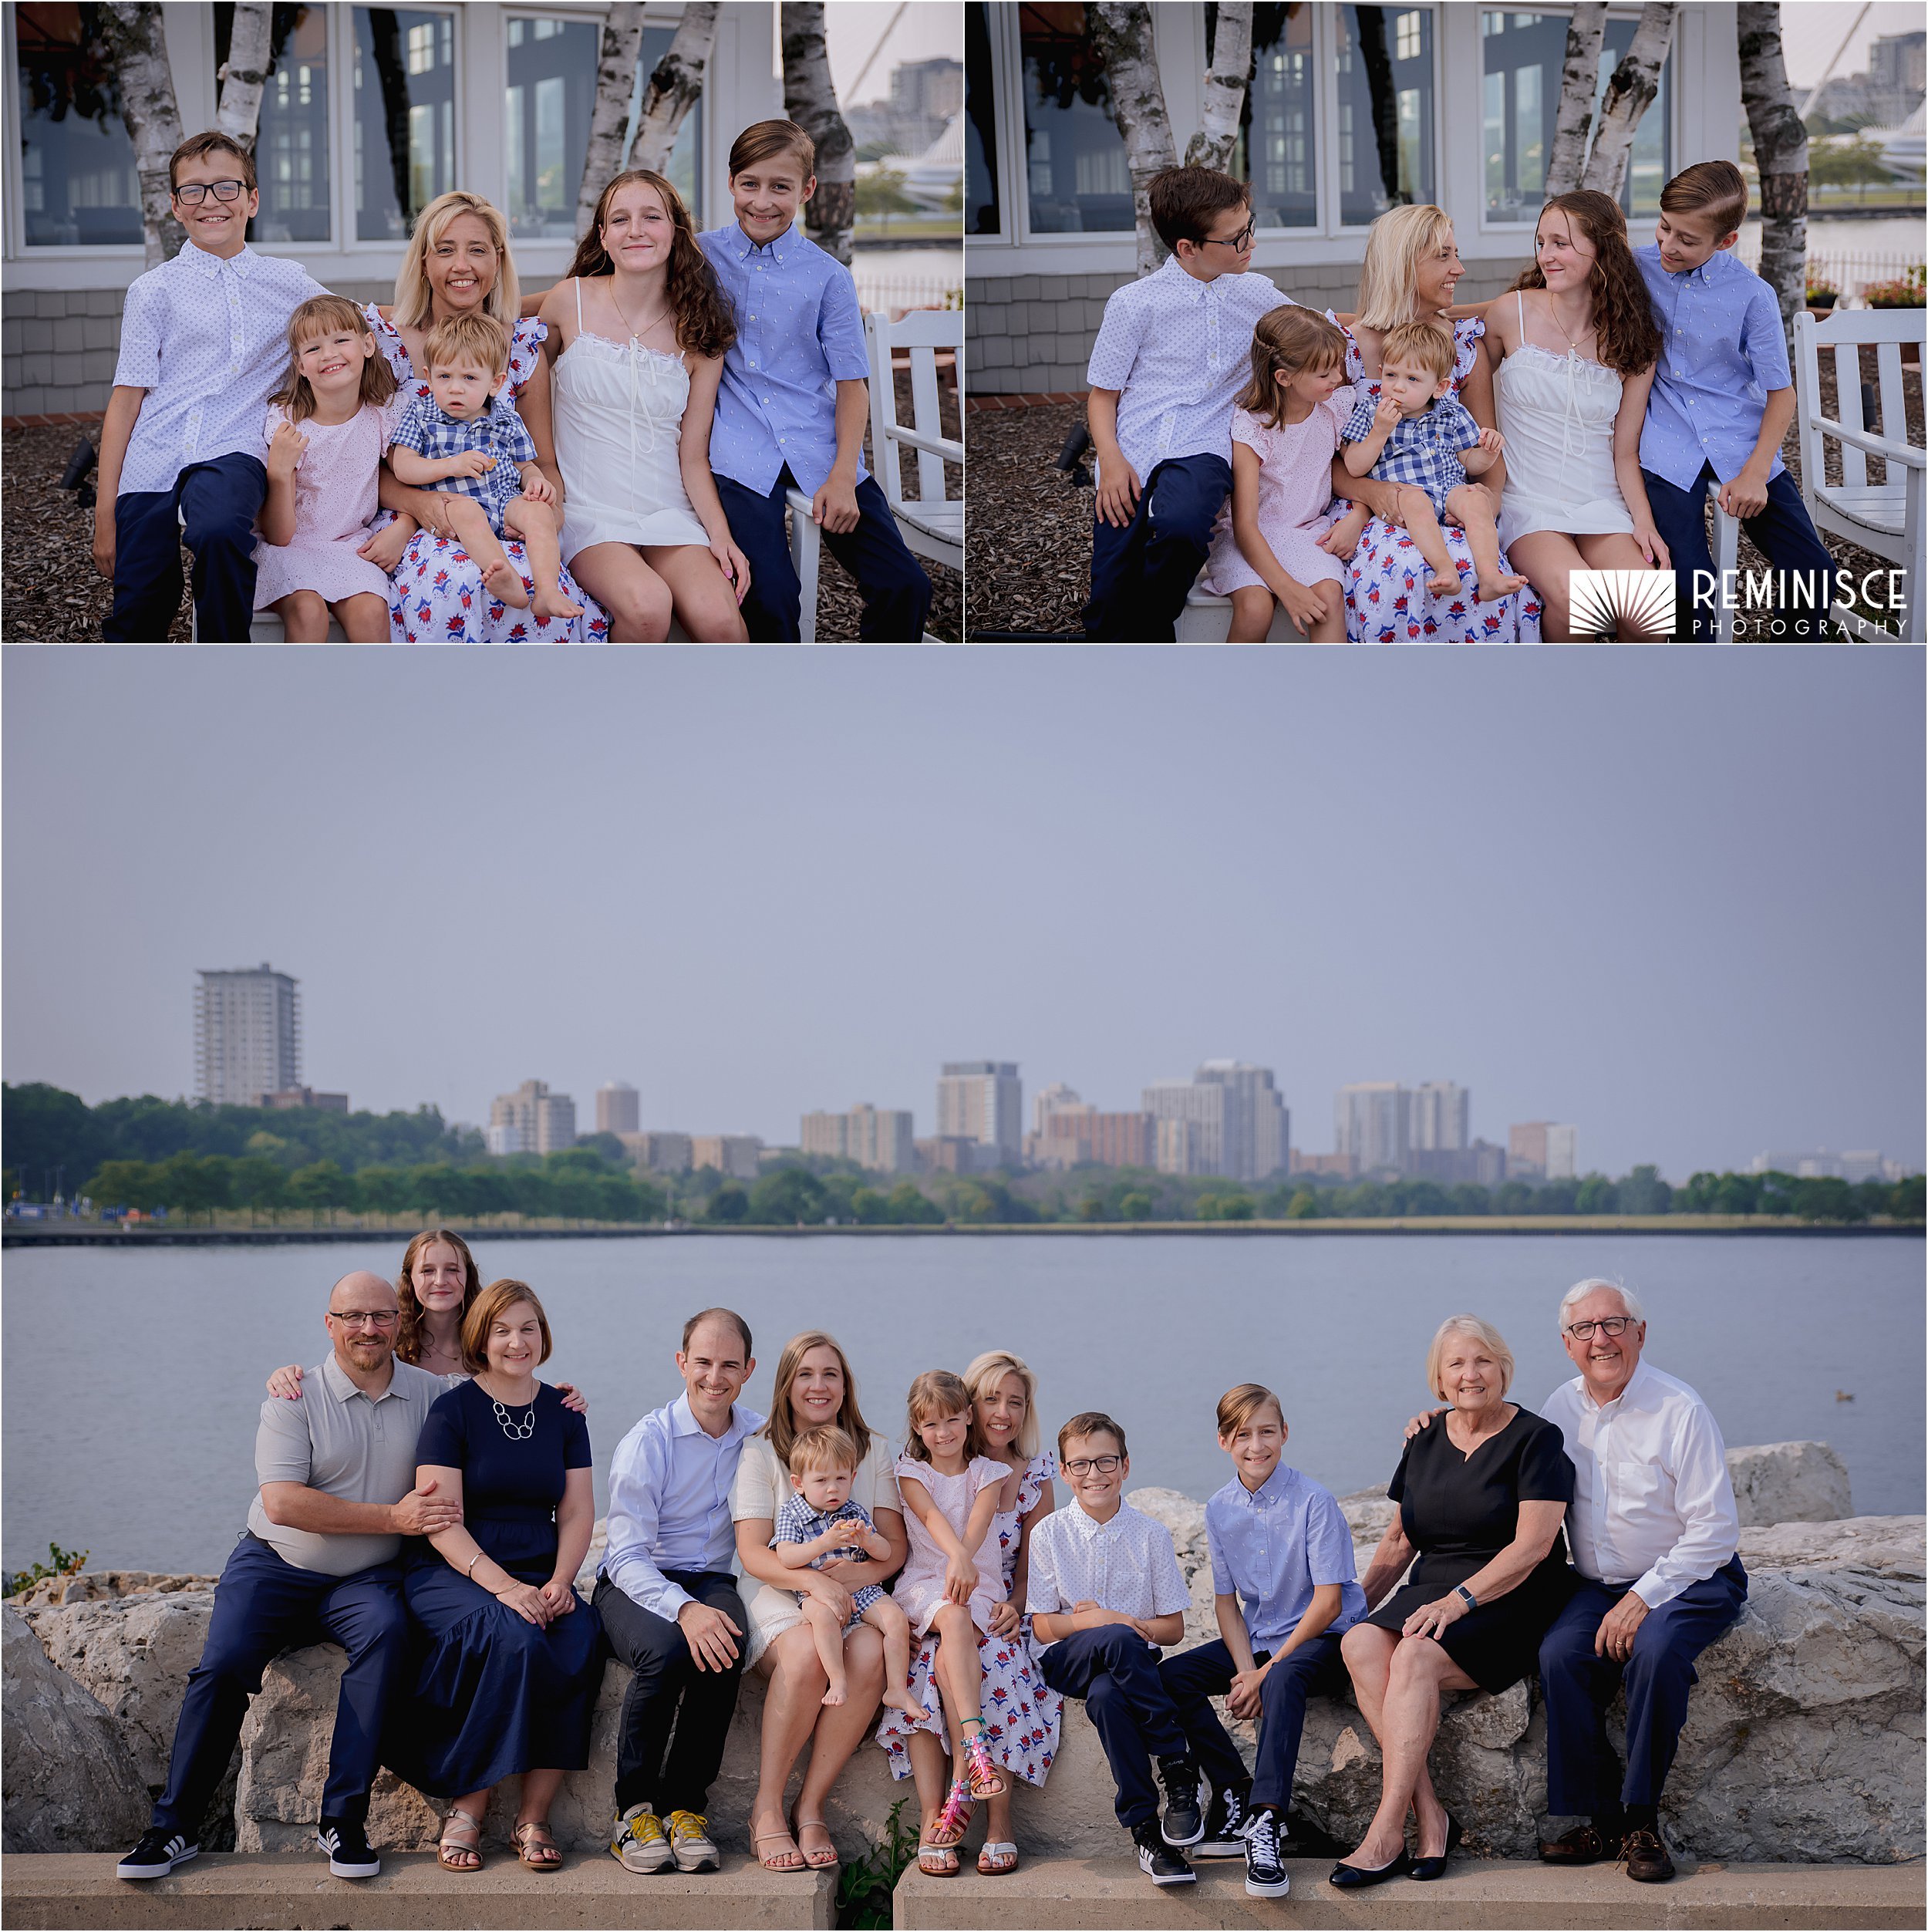 Best Milwaukee, Madison, and Chicago family portrait session photographer. Artistic and candid photography sessions featuring kids, newborns, and babies doing fun poses at their photoshoots.